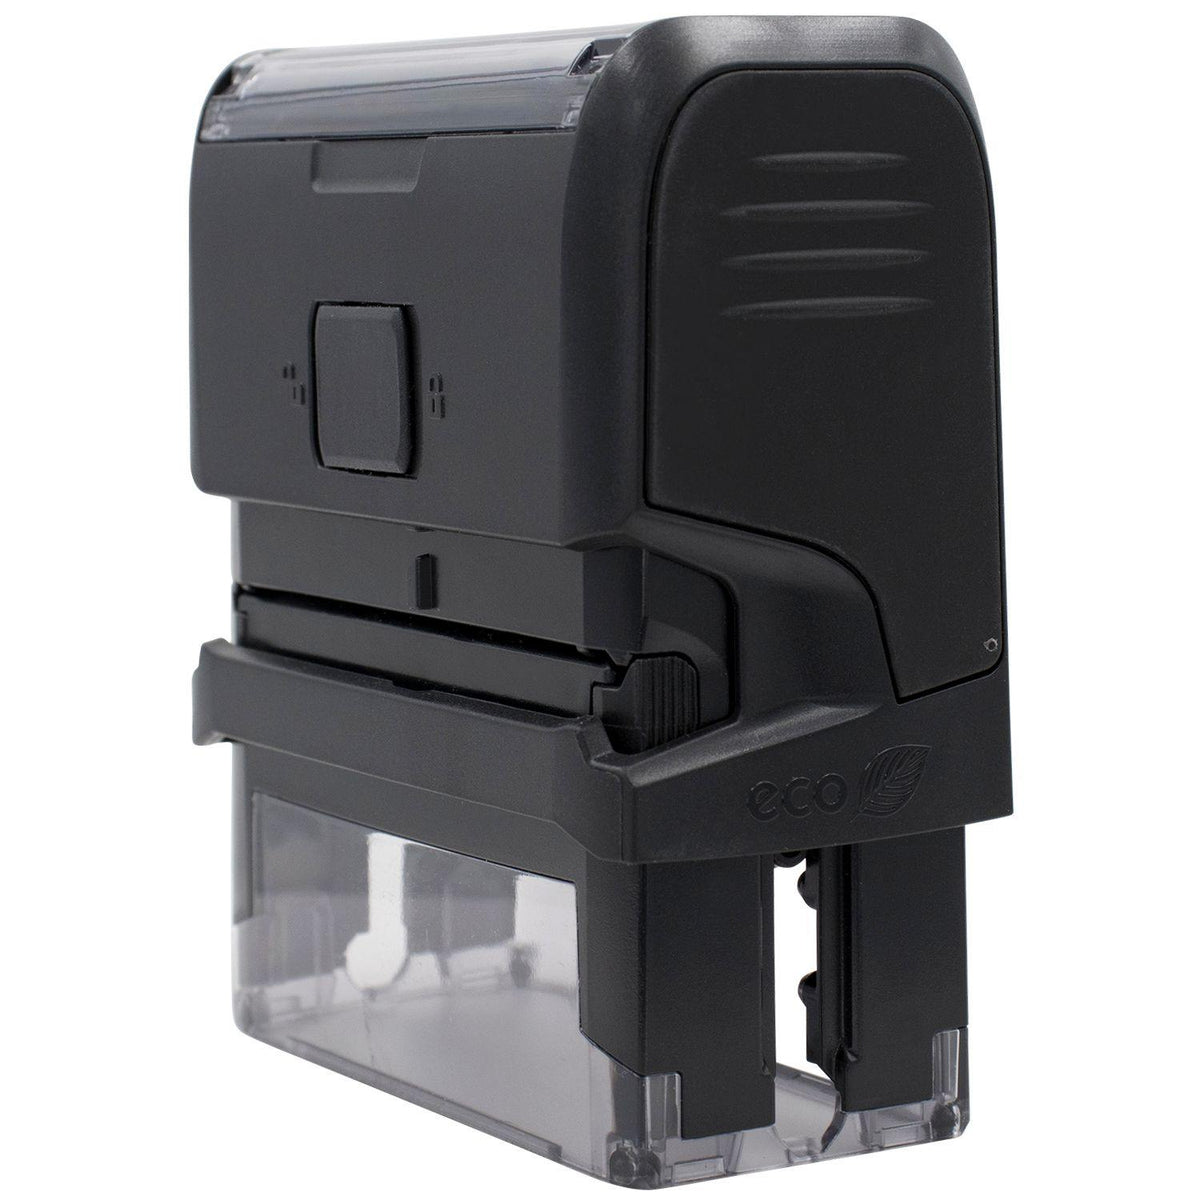 Self Inking Trust Stamp - Engineer Seal Stamps - Brand_Trodat, Impression Size_Small, Stamp Type_Self-Inking Stamp, Type of Use_Finance, Type of Use_Legal